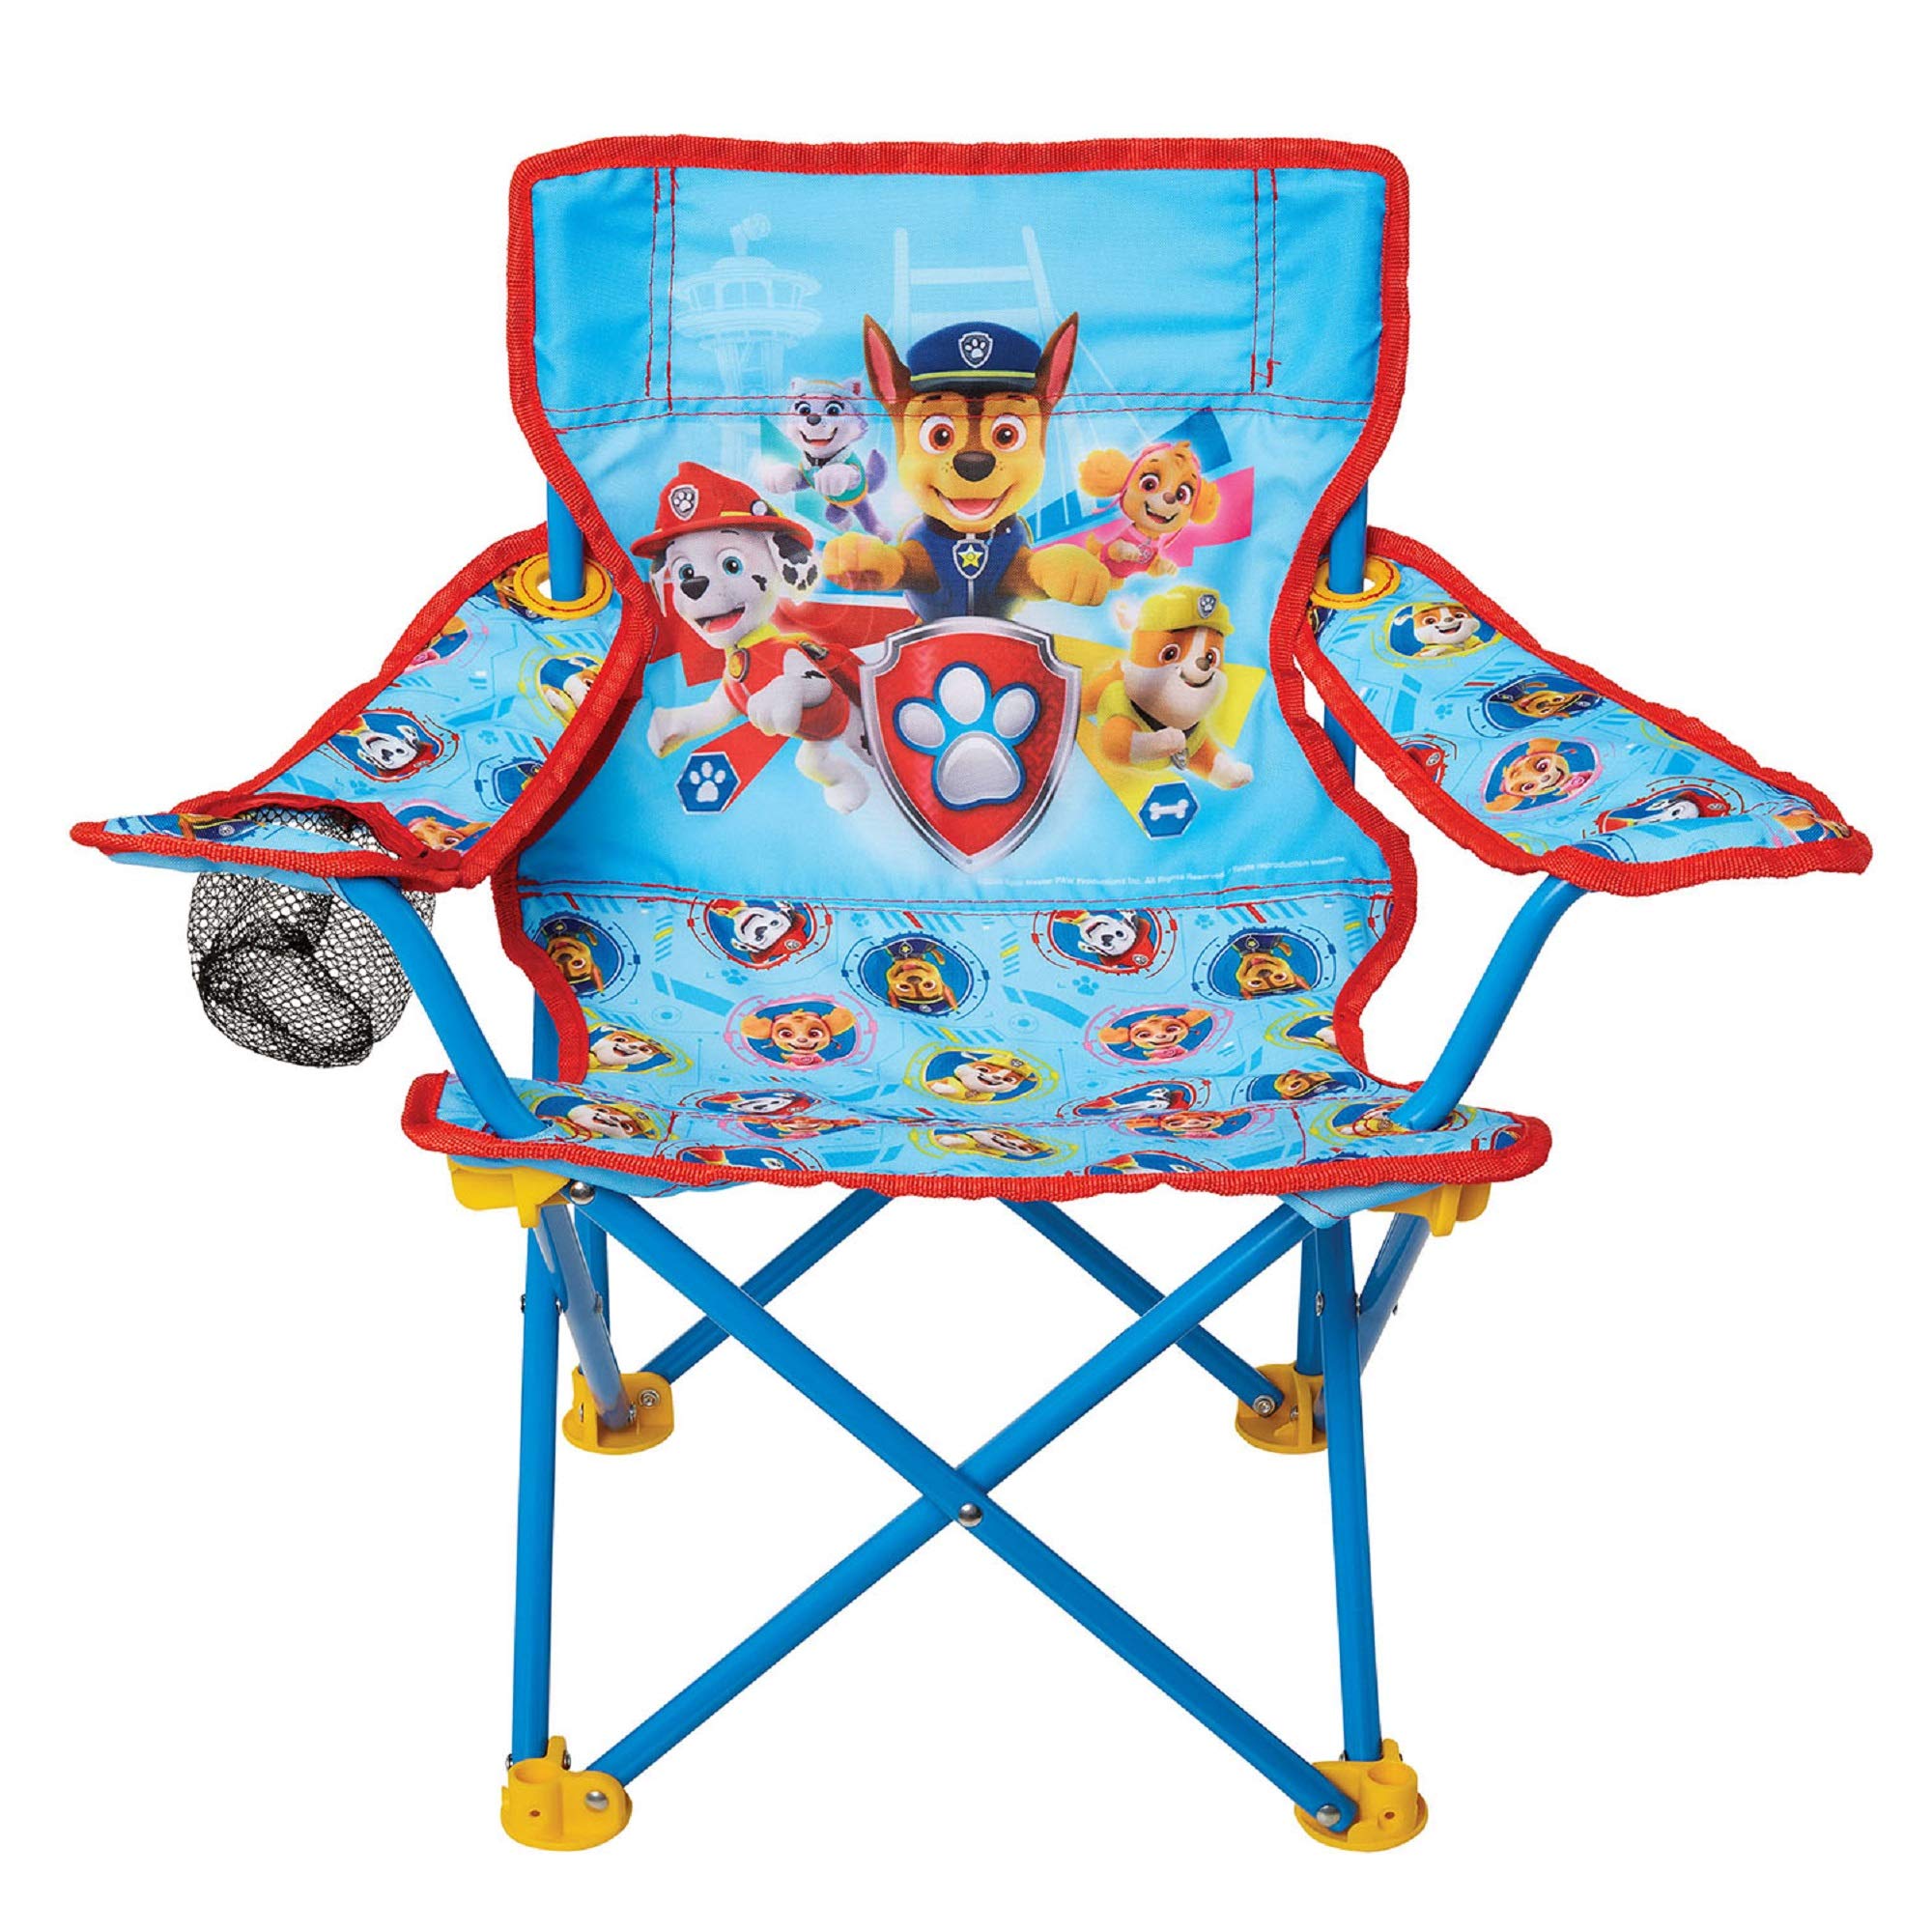 Paw Patrol Kids Camping Chair, Camp Fold N Go Chair with Carry Bag